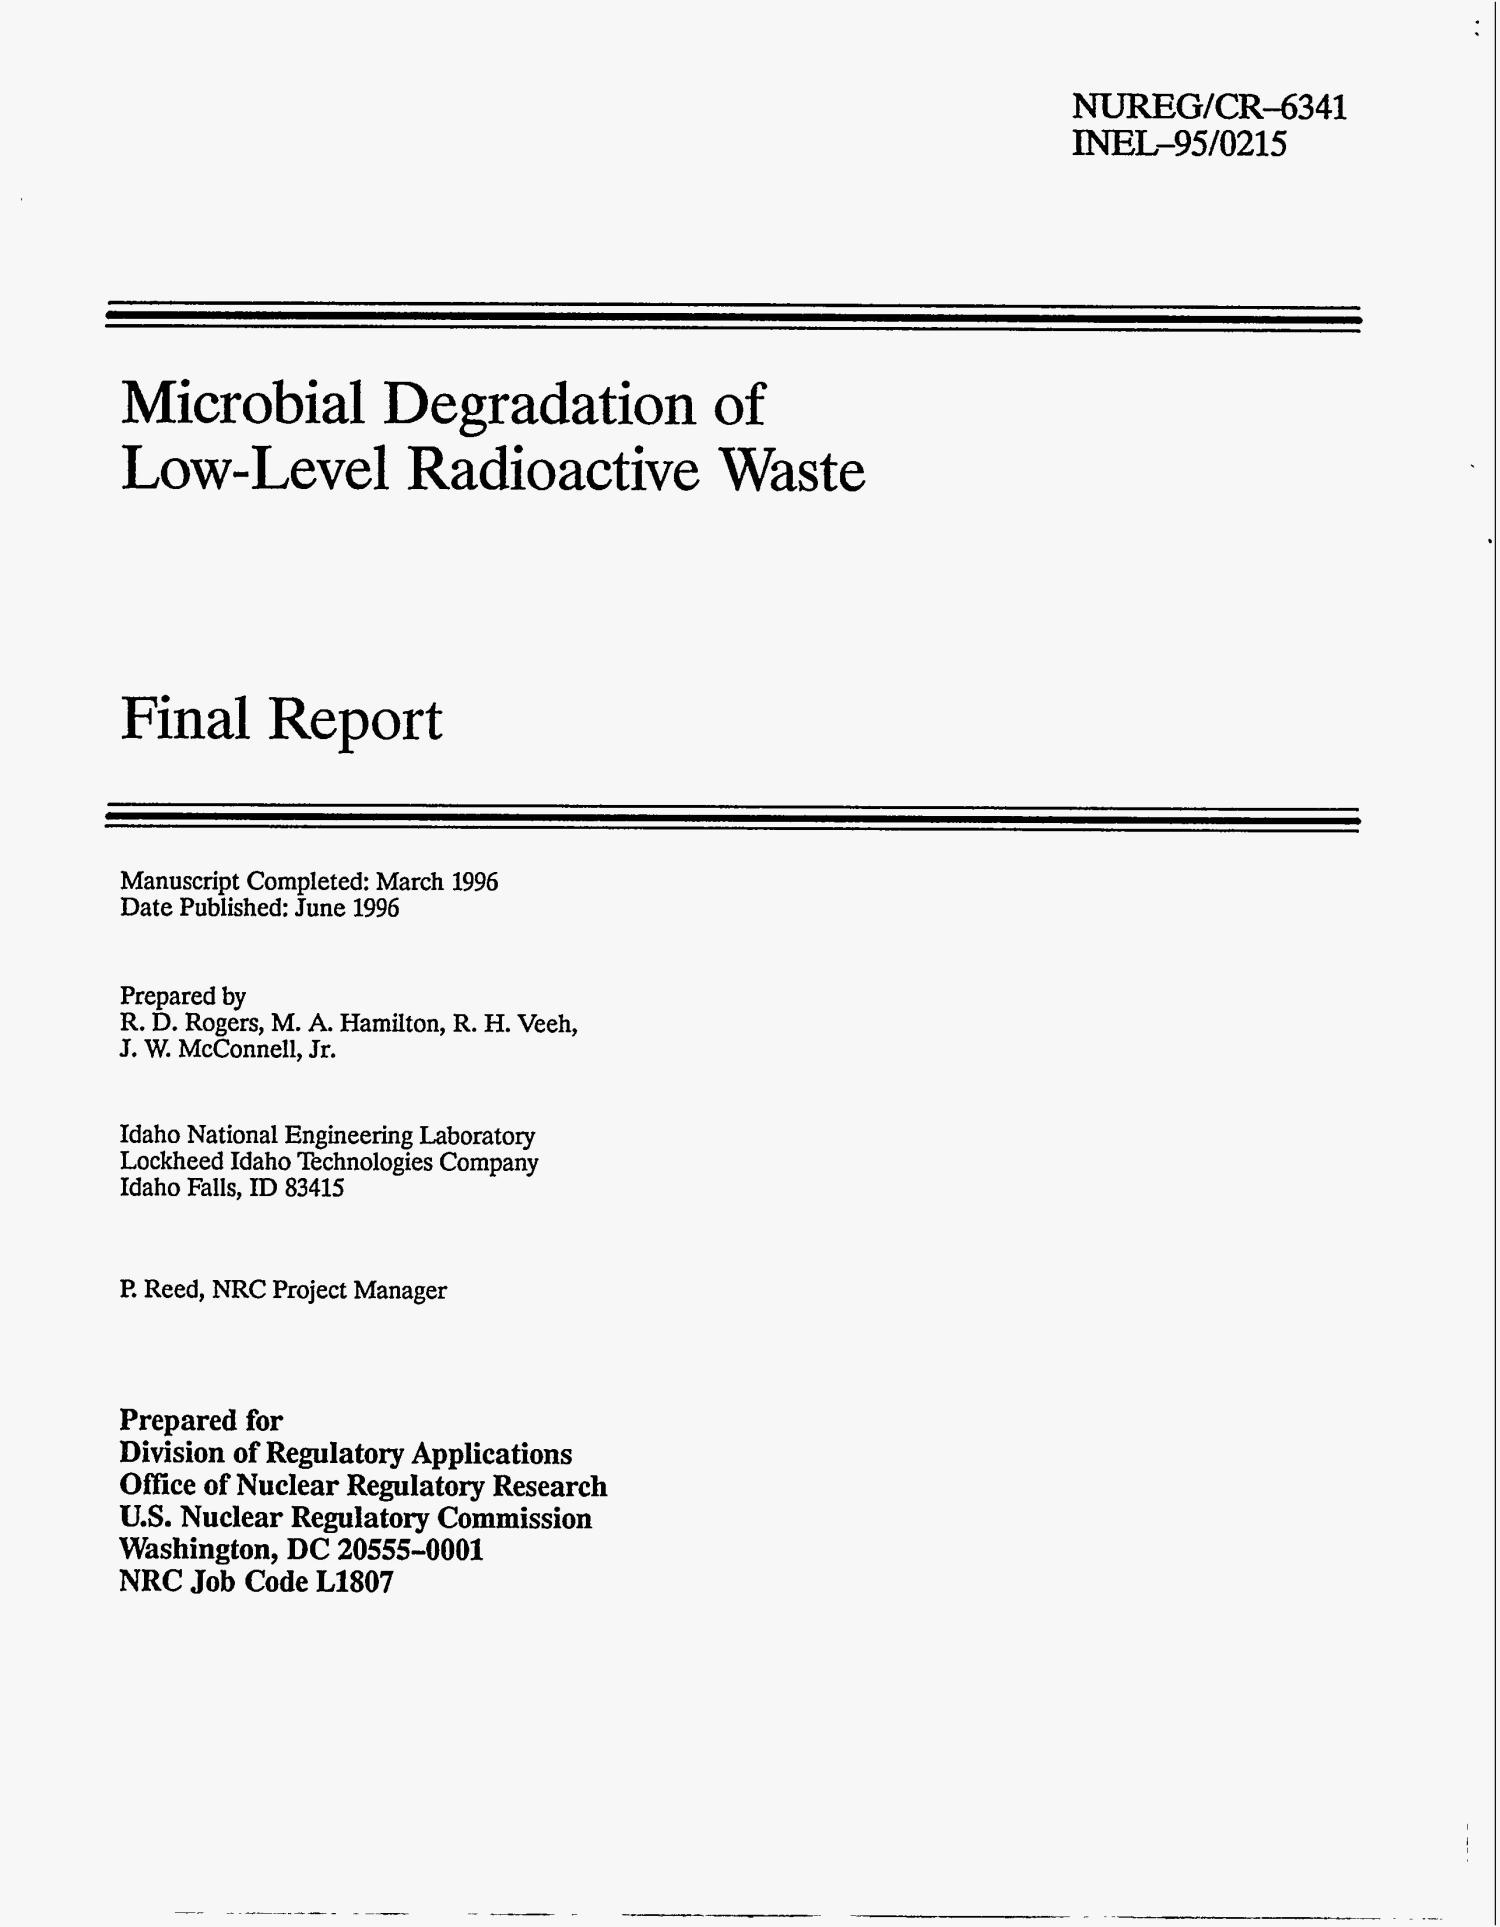 Microbial degradation of low-level radioactive waste. Final report
                                                
                                                    [Sequence #]: 3 of 117
                                                